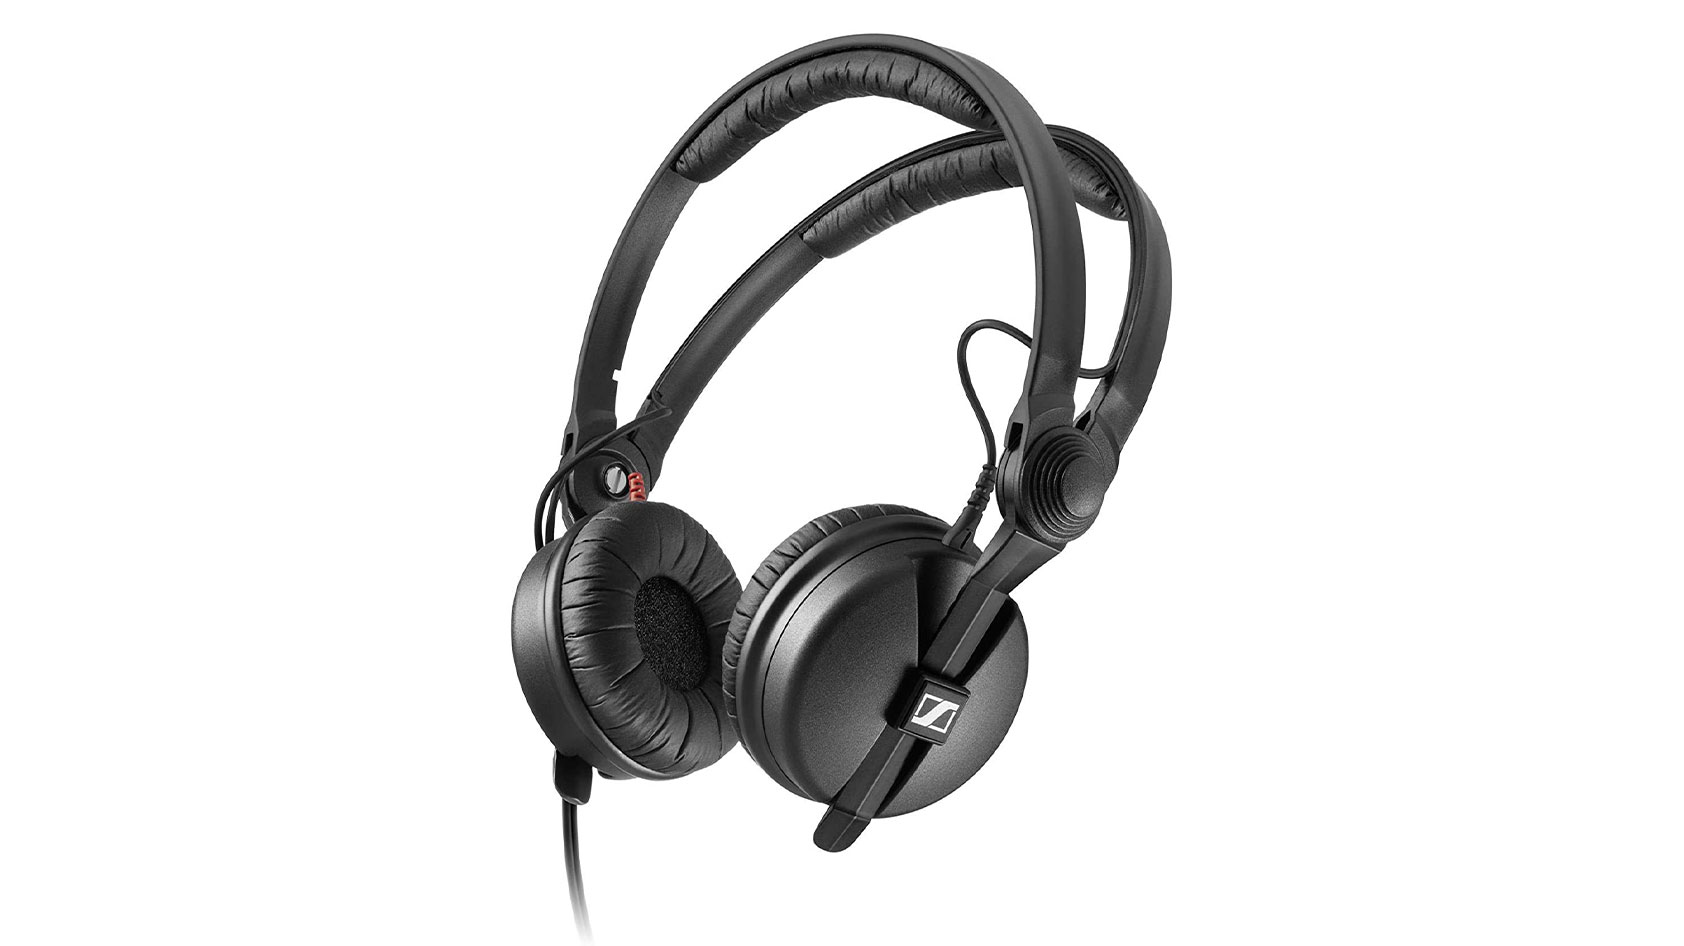 The Sennheiser HD 25 on-ear headphones for DJs and studio mixers in black against a white background.